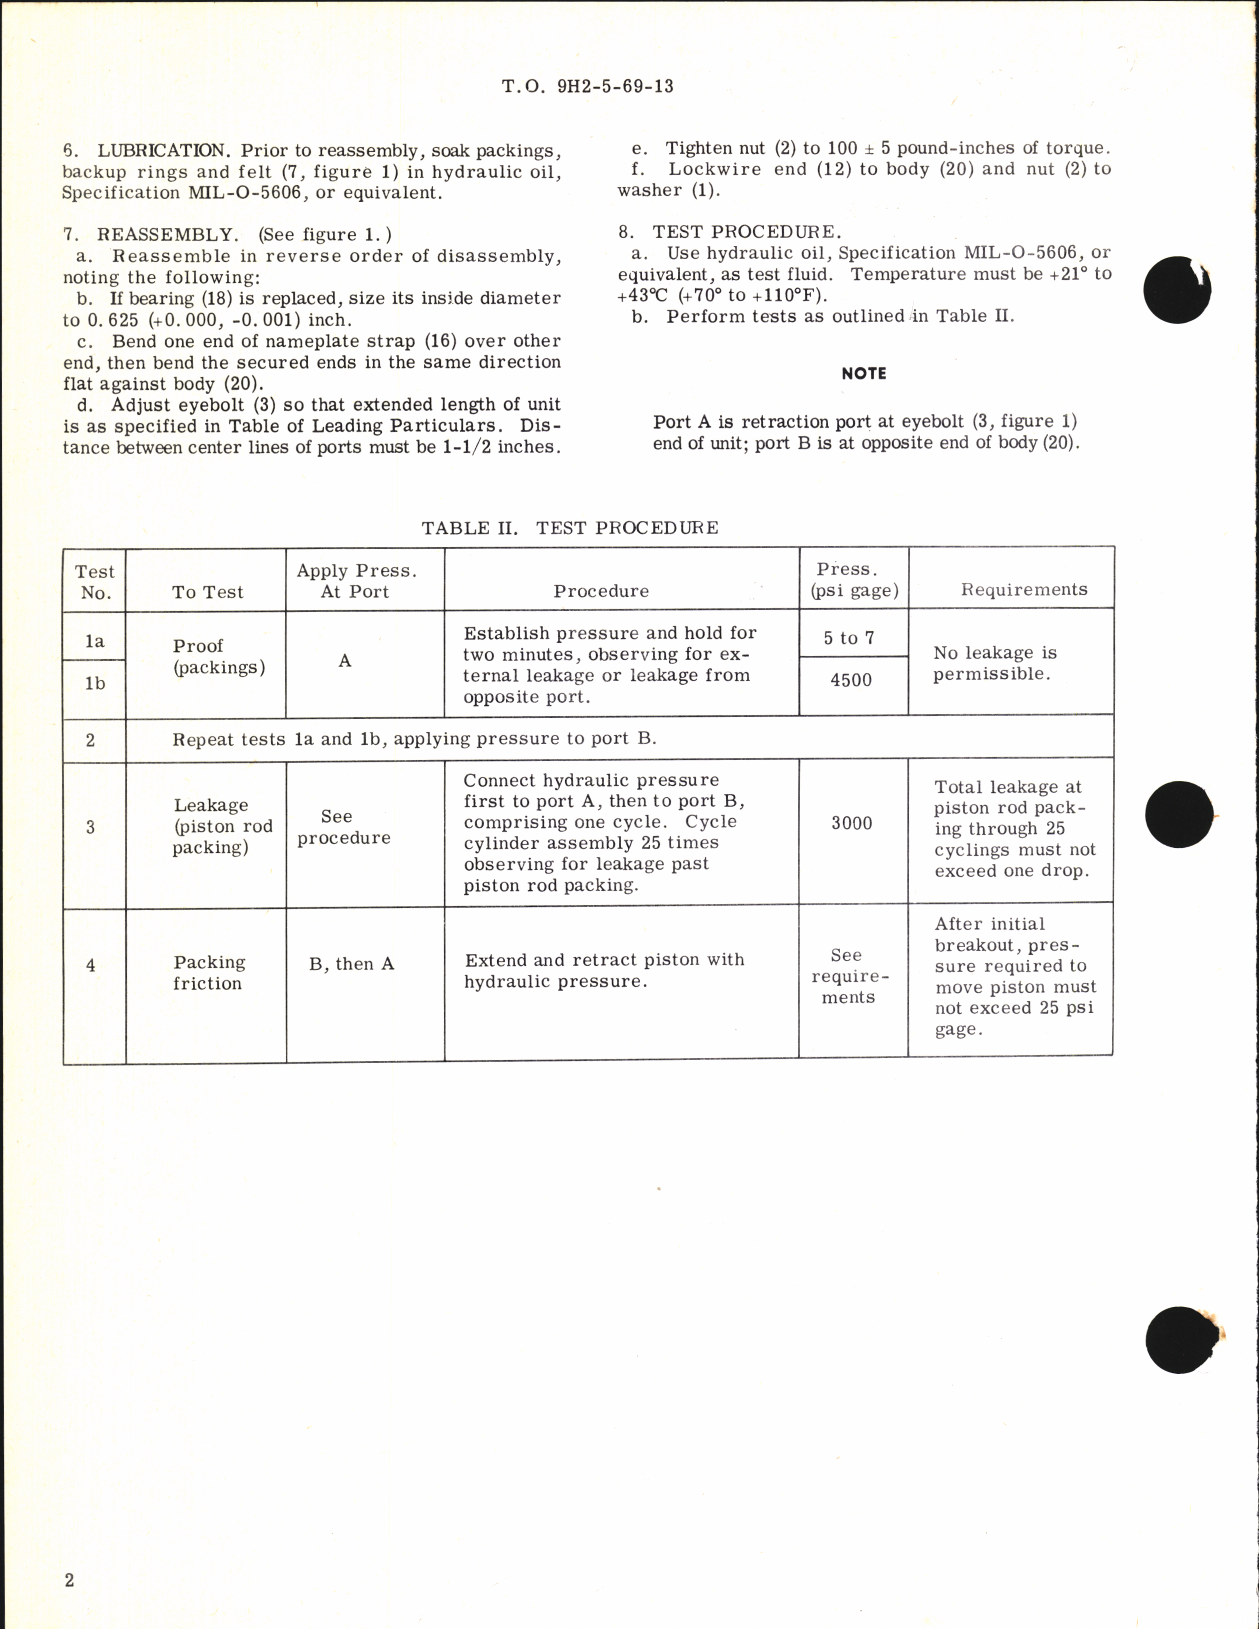 Sample page 2 from AirCorps Library document: Overhaul Instructions with Parts Breakdown for Bomb Door Forward Latch Cylinder Assembly Part No. 300020D